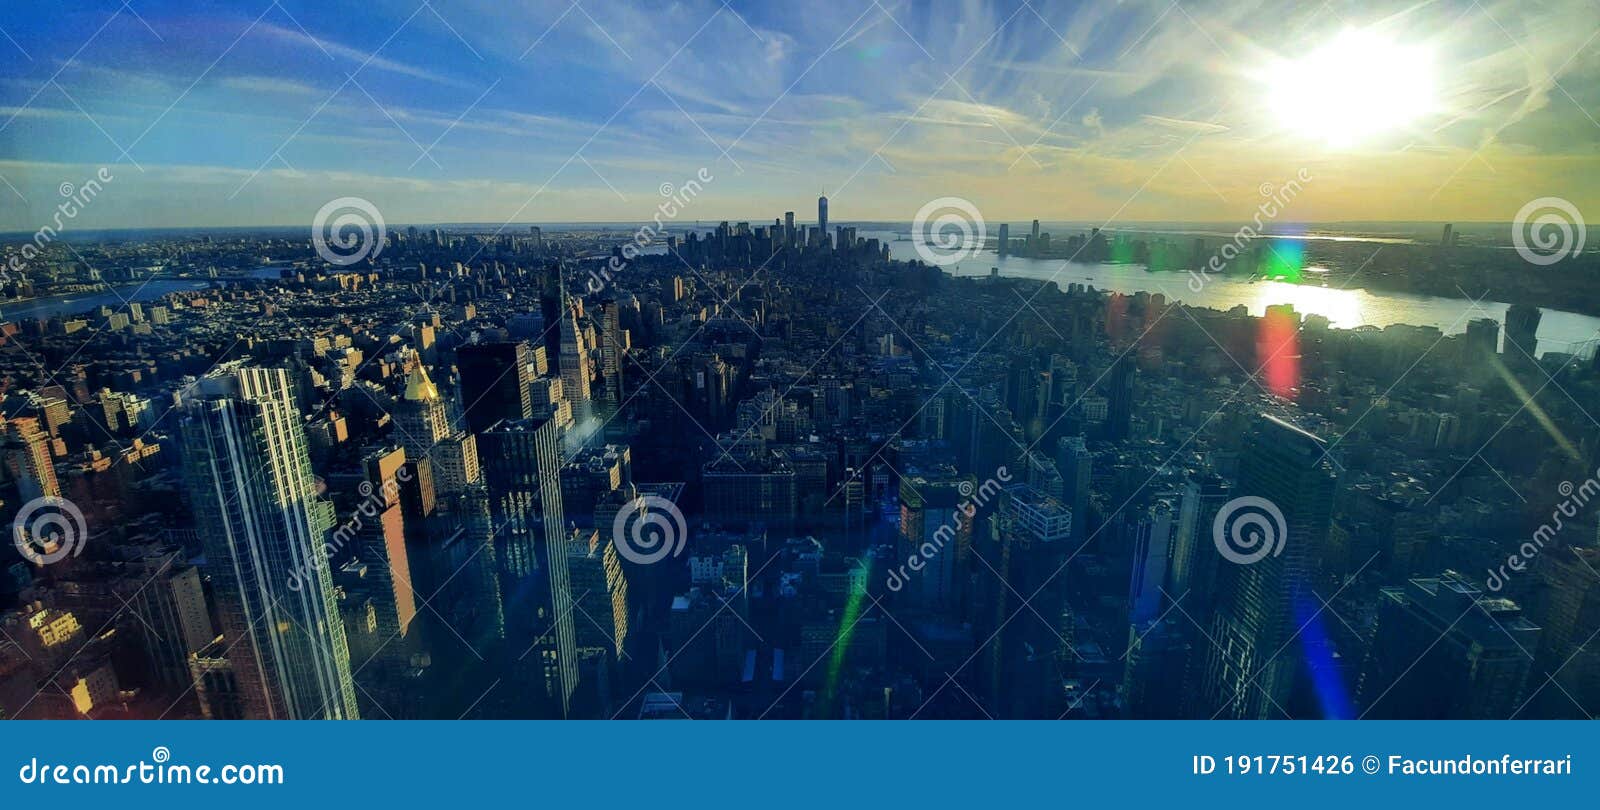 new york skyline from empire state building